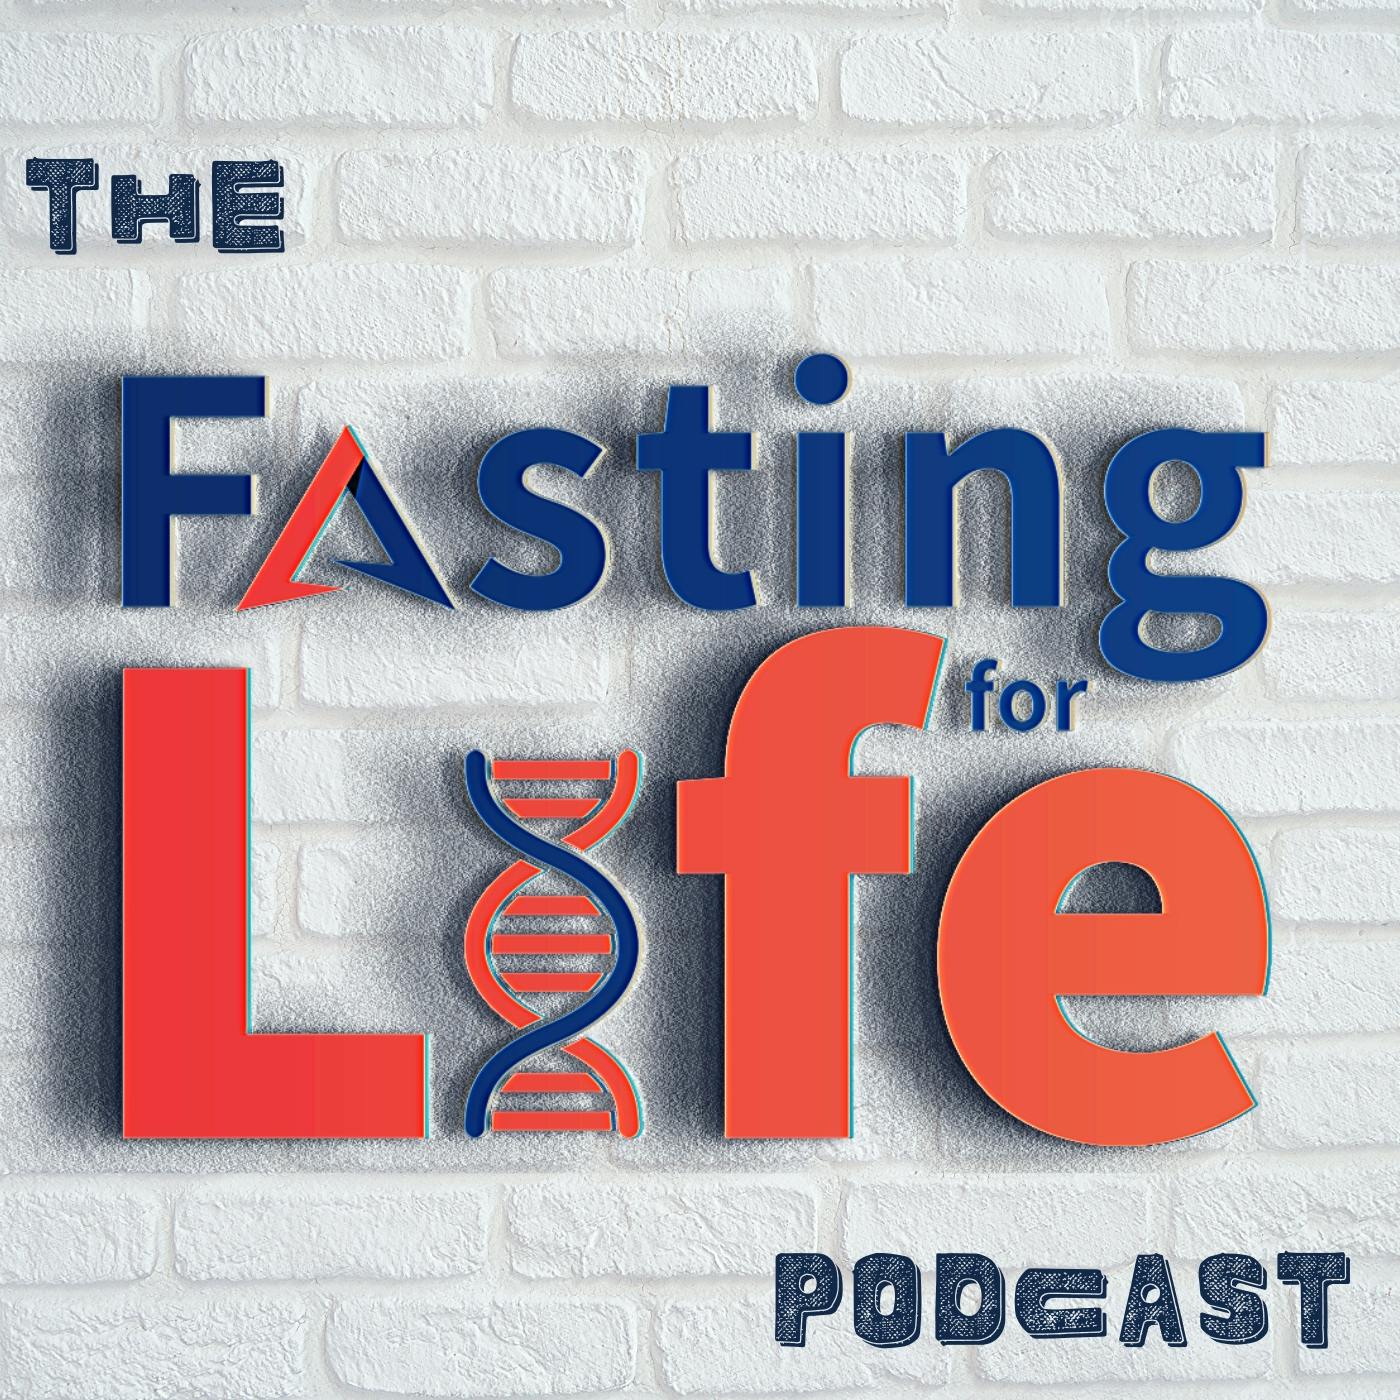 Ep. 107 - Listener Q&A | Isn't fasting just calorie restriction? | How much should I eat? | Help! I can't stop eating once I start! | How do I get my spouse on board? | I get cramps when I fast...what